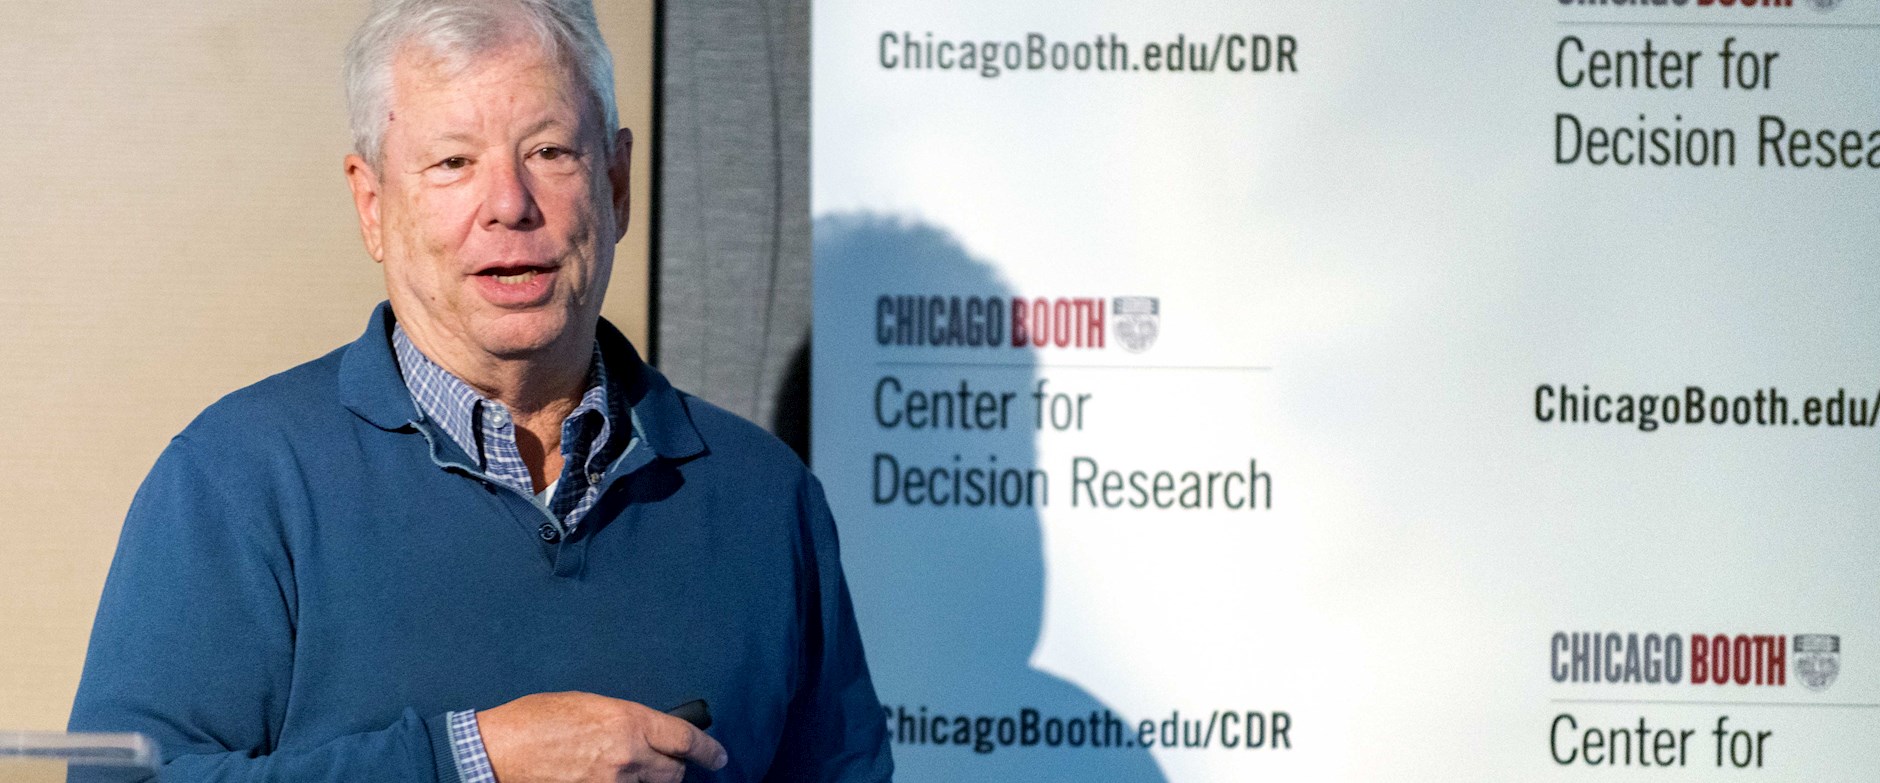 Richard Thaler presenting at the Chicago Booth Center for Decision Research